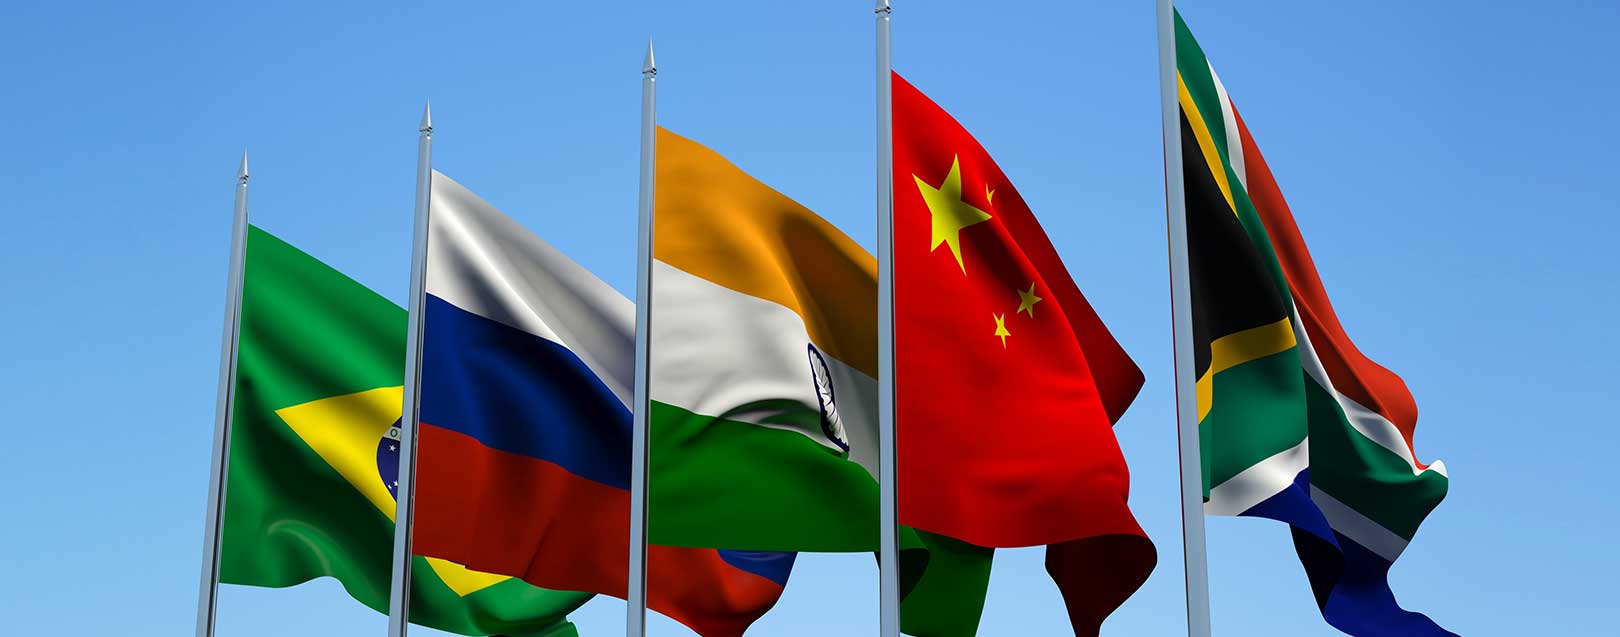 BRICS ministers meet urges for cooperation on e-commerce